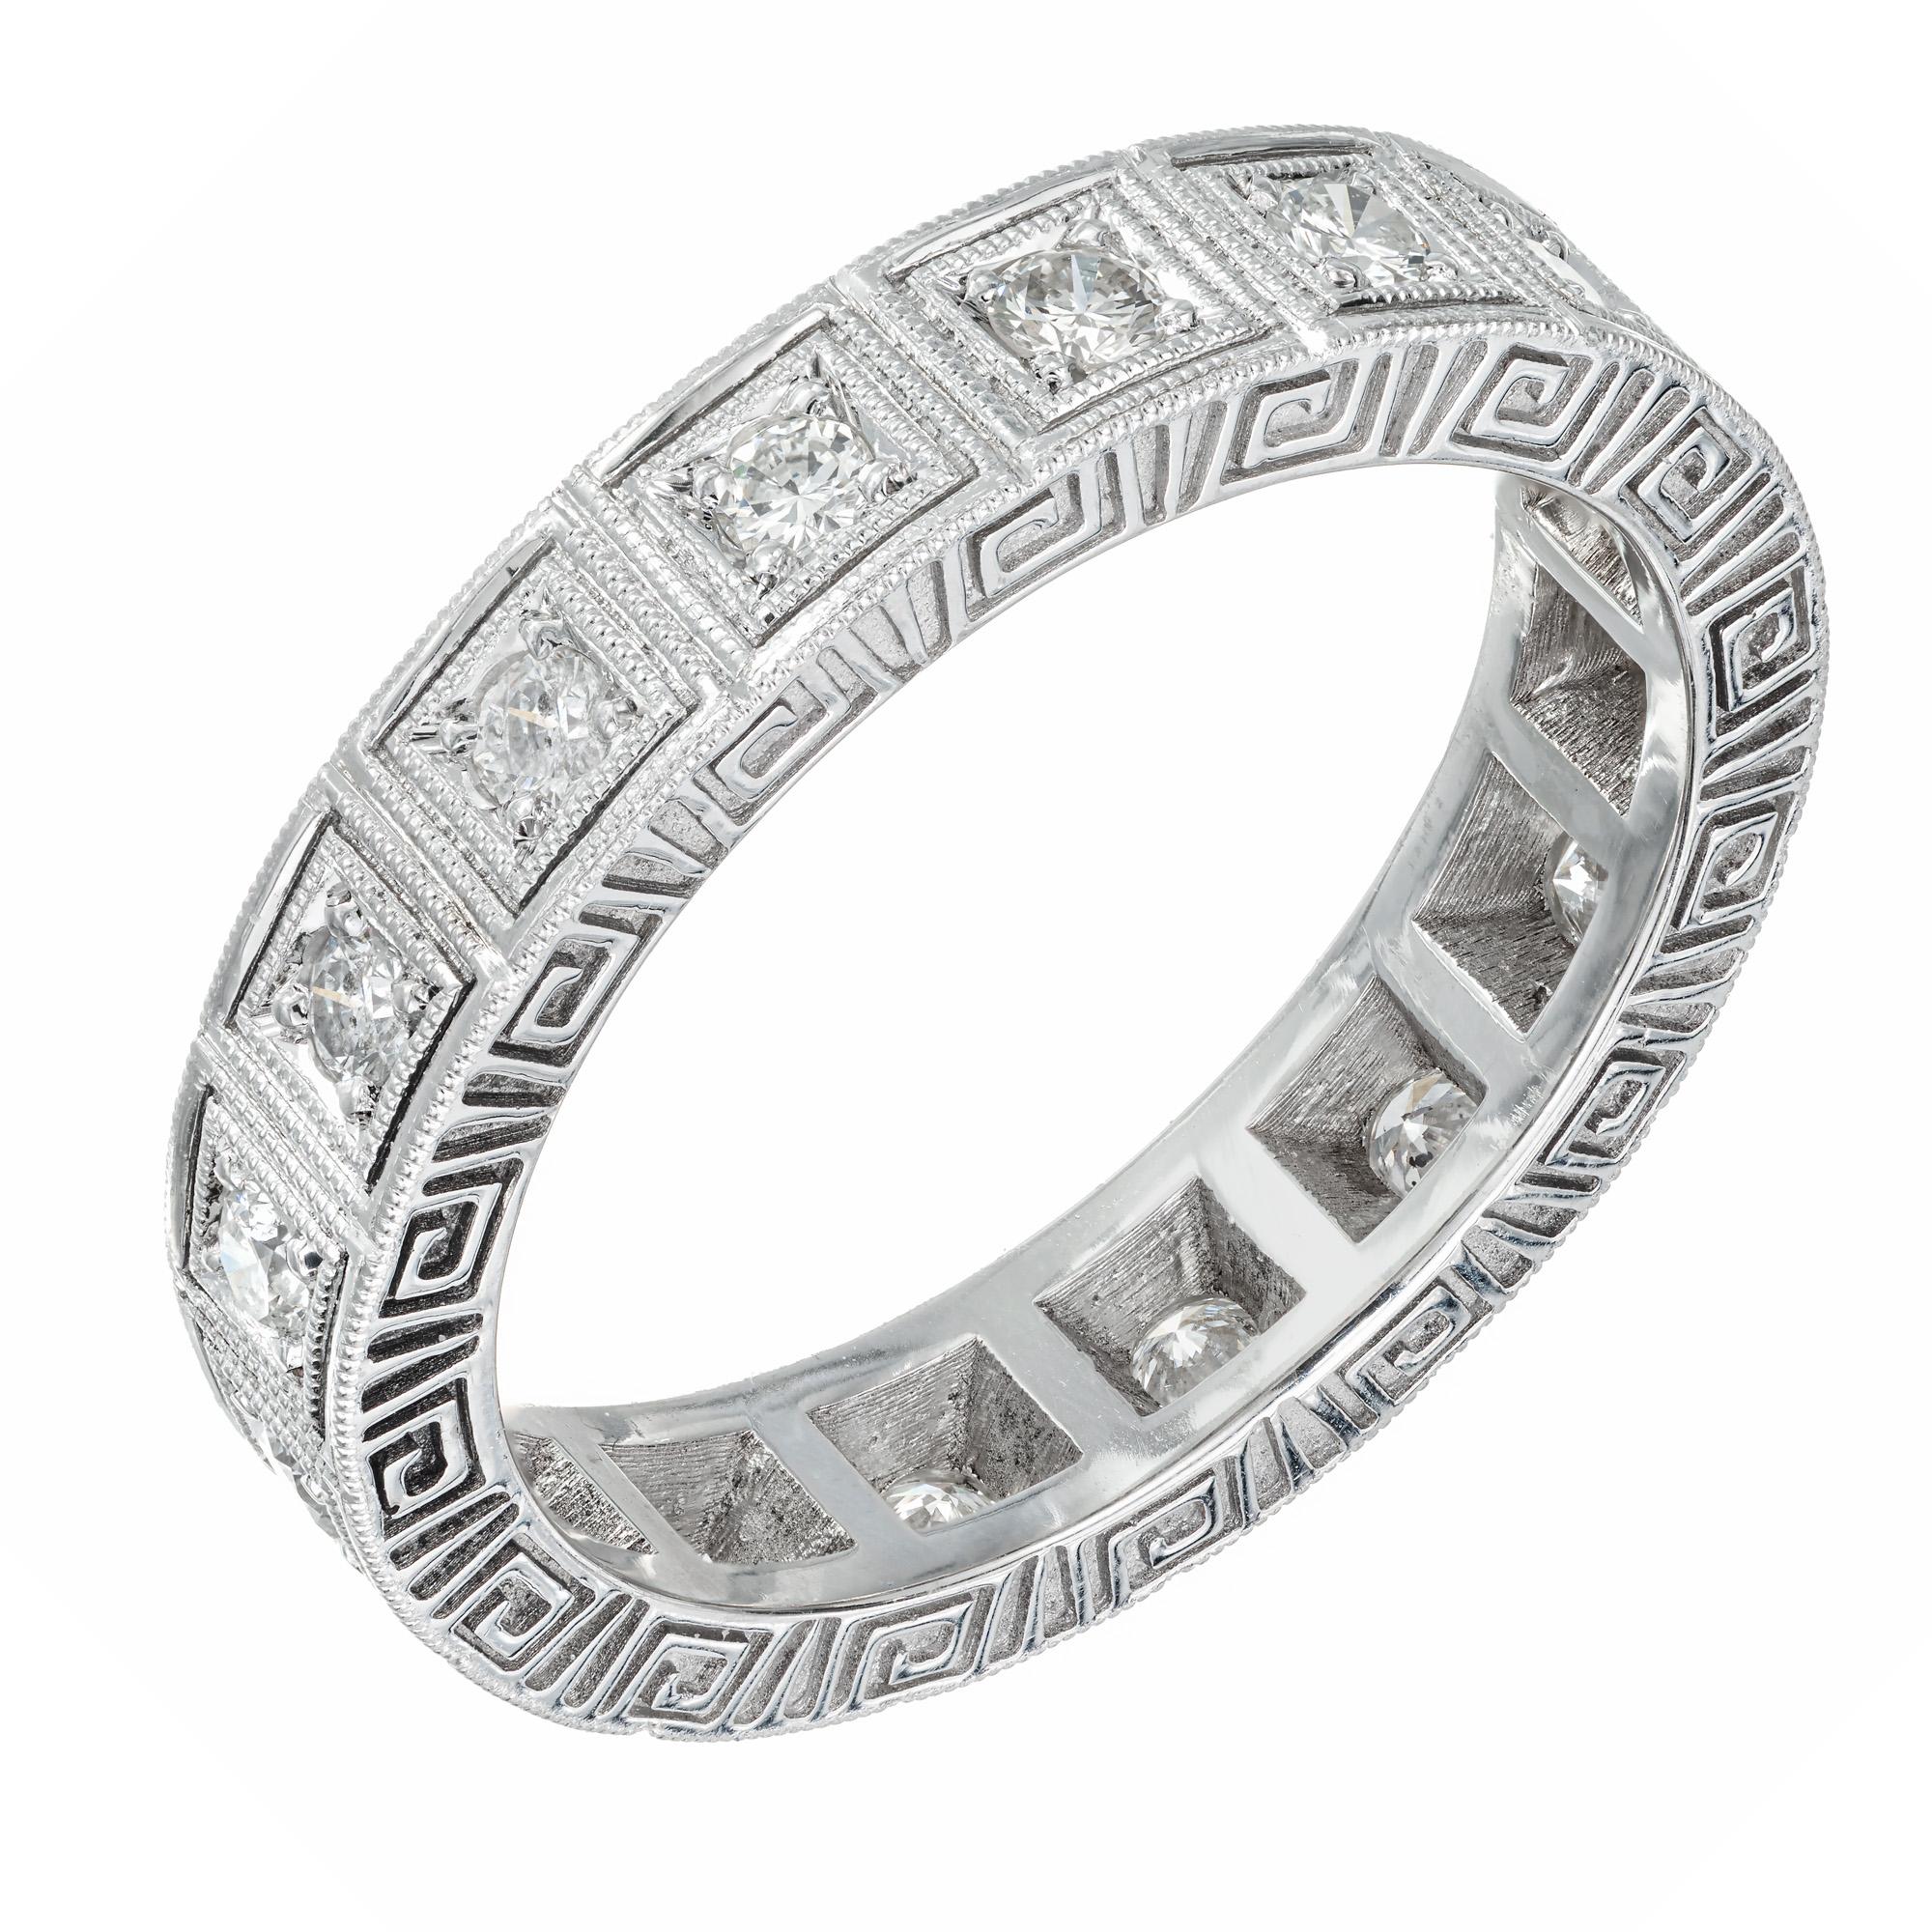 Custom made 14k white gold diamond eternity wedding band ring. 16 round diamonds in a bead set, engraved setting. Can be made in different sizes, stones and metals. Designed and crafted in the Peter Suchy Workshop.

16 round diamonds, H-I SI approx.